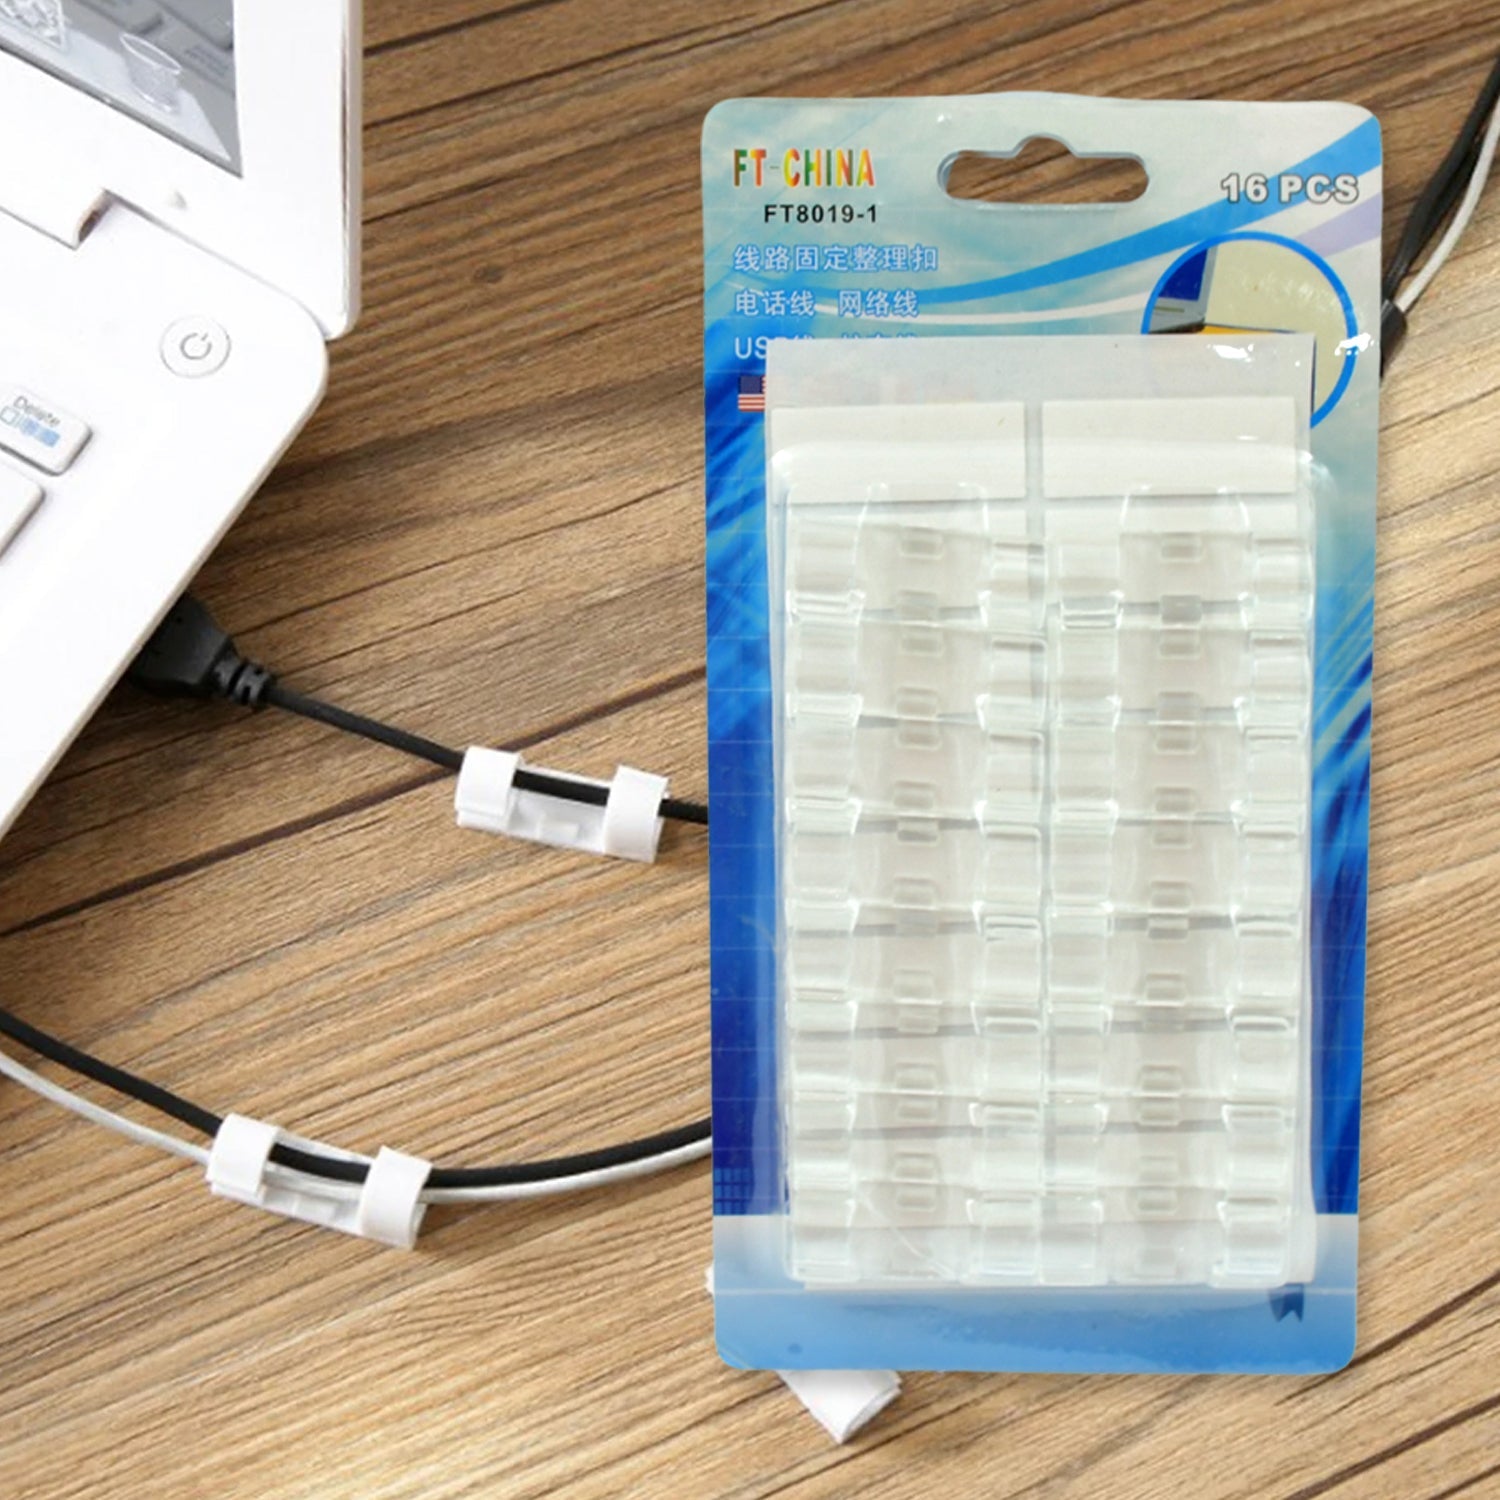 7452 Self-Adhesive Cable Clips Use in Office Wire Desktop Organizer Charging Co lder Management, Multipurpose Adhesive Cable Clips Desktop Cord Organizer Hook, Cable Management, Wire Holder System (16 Pcs Set )